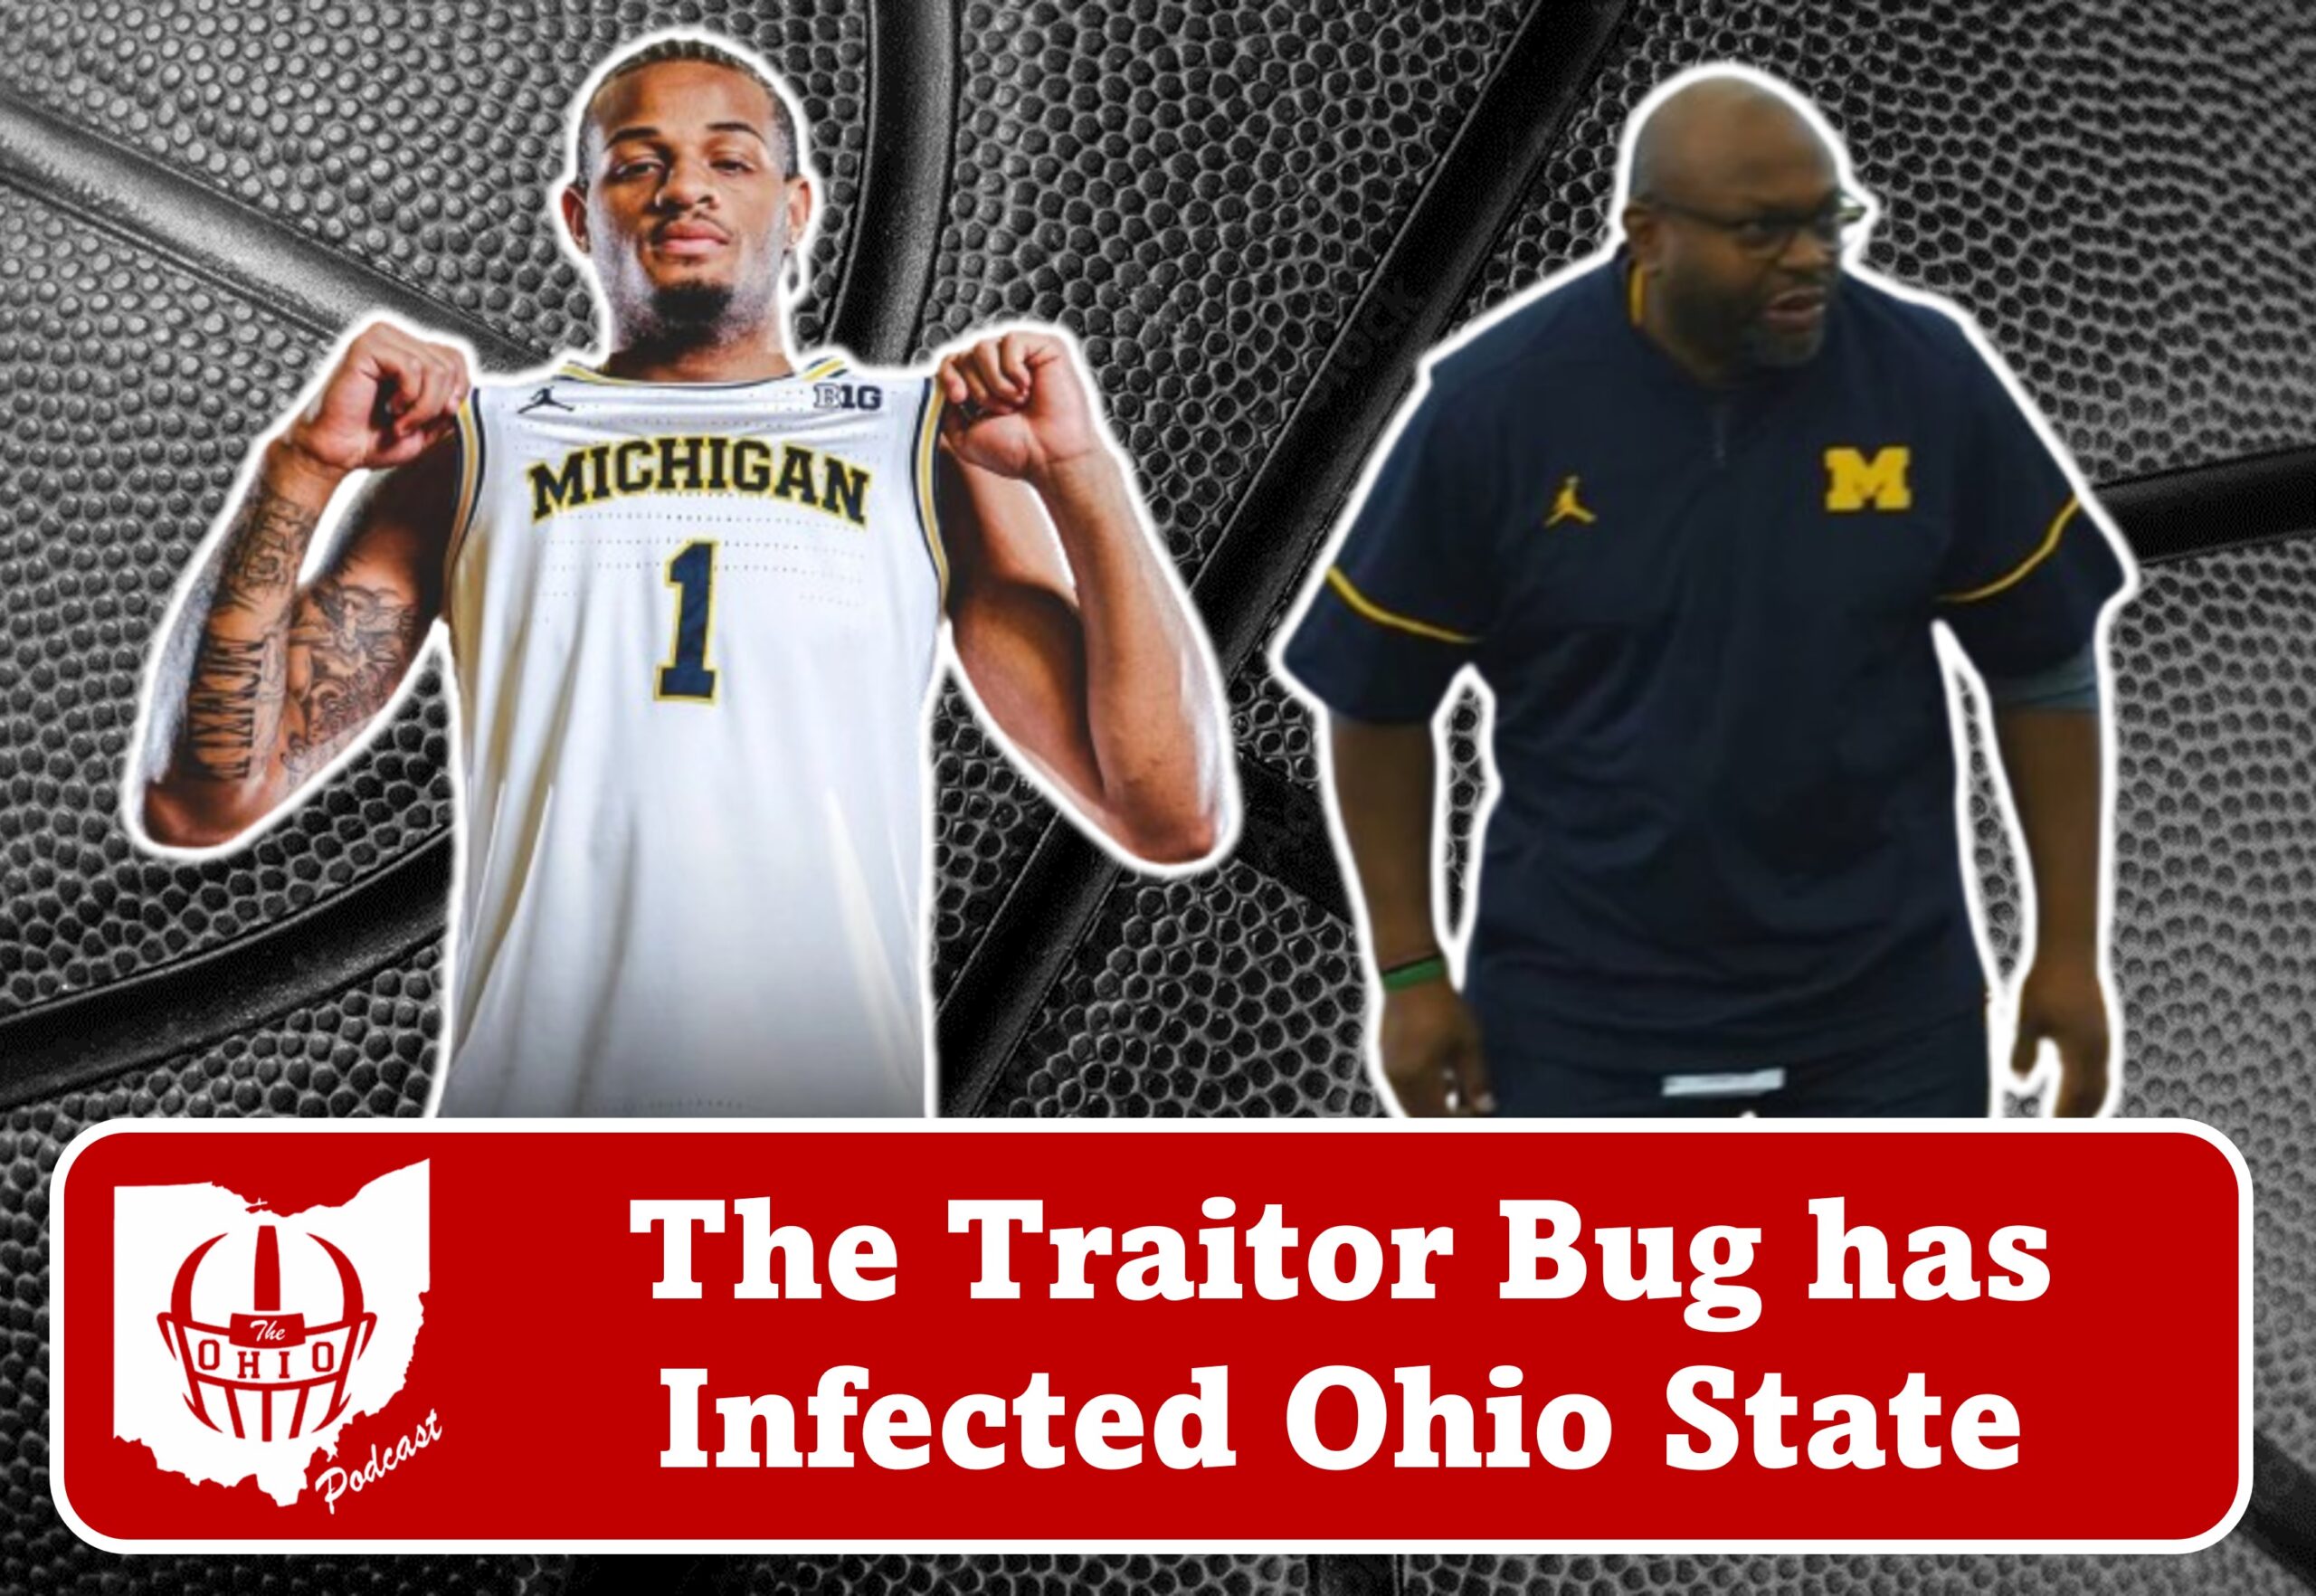 The Traitor Bug has Infected Ohio State